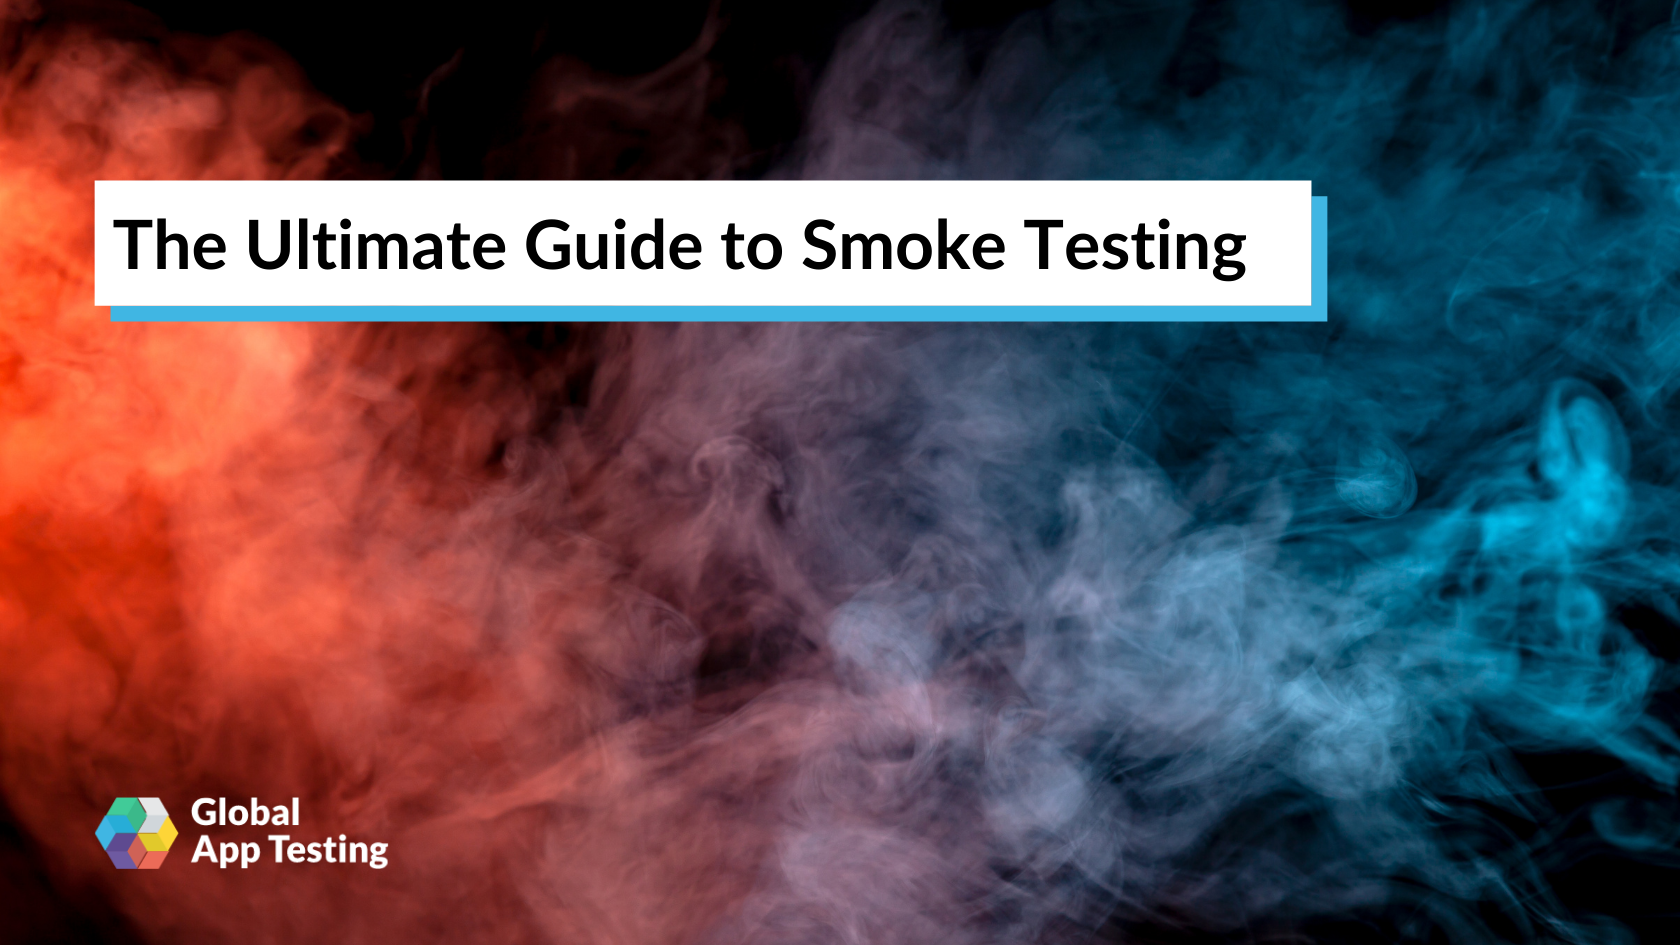 The Ultimate Guide to Smoke Testing